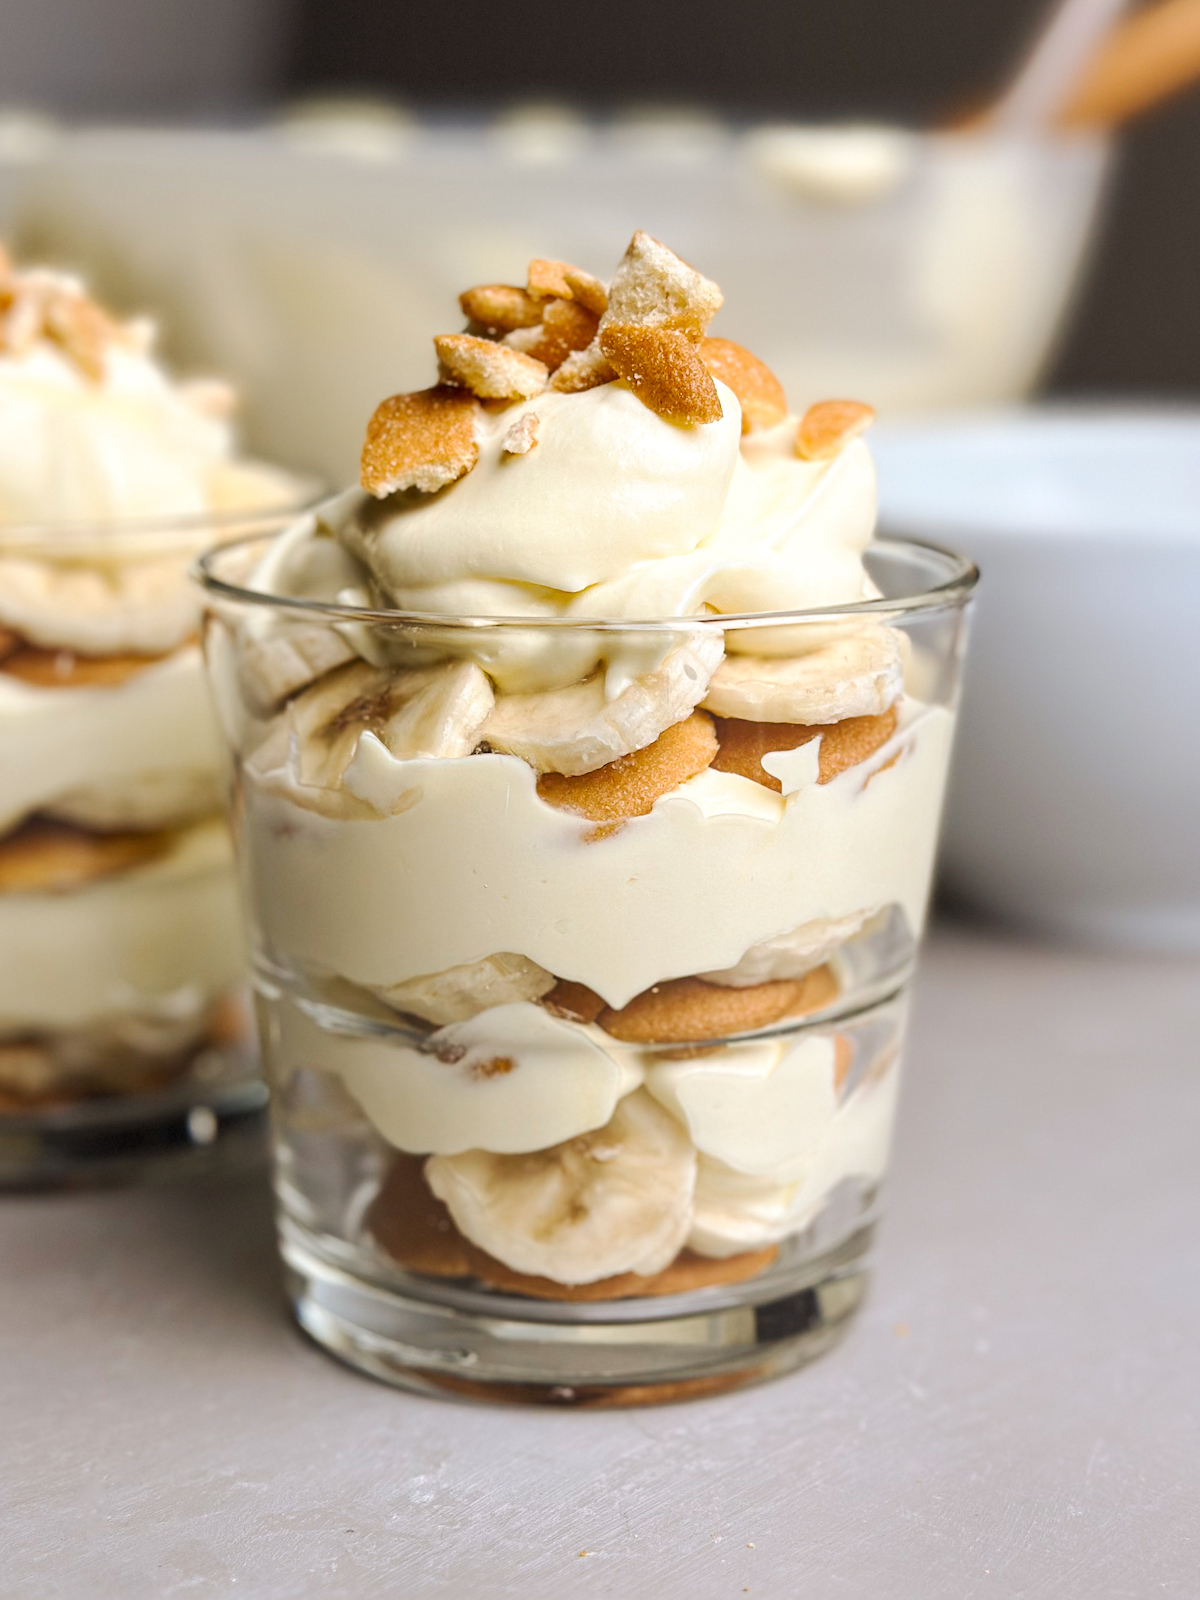 A glass of banana pudding with three layers of Nilla wafers, sliced bananas, vanilla pudding, topped with crumbles of Nilla wafers.